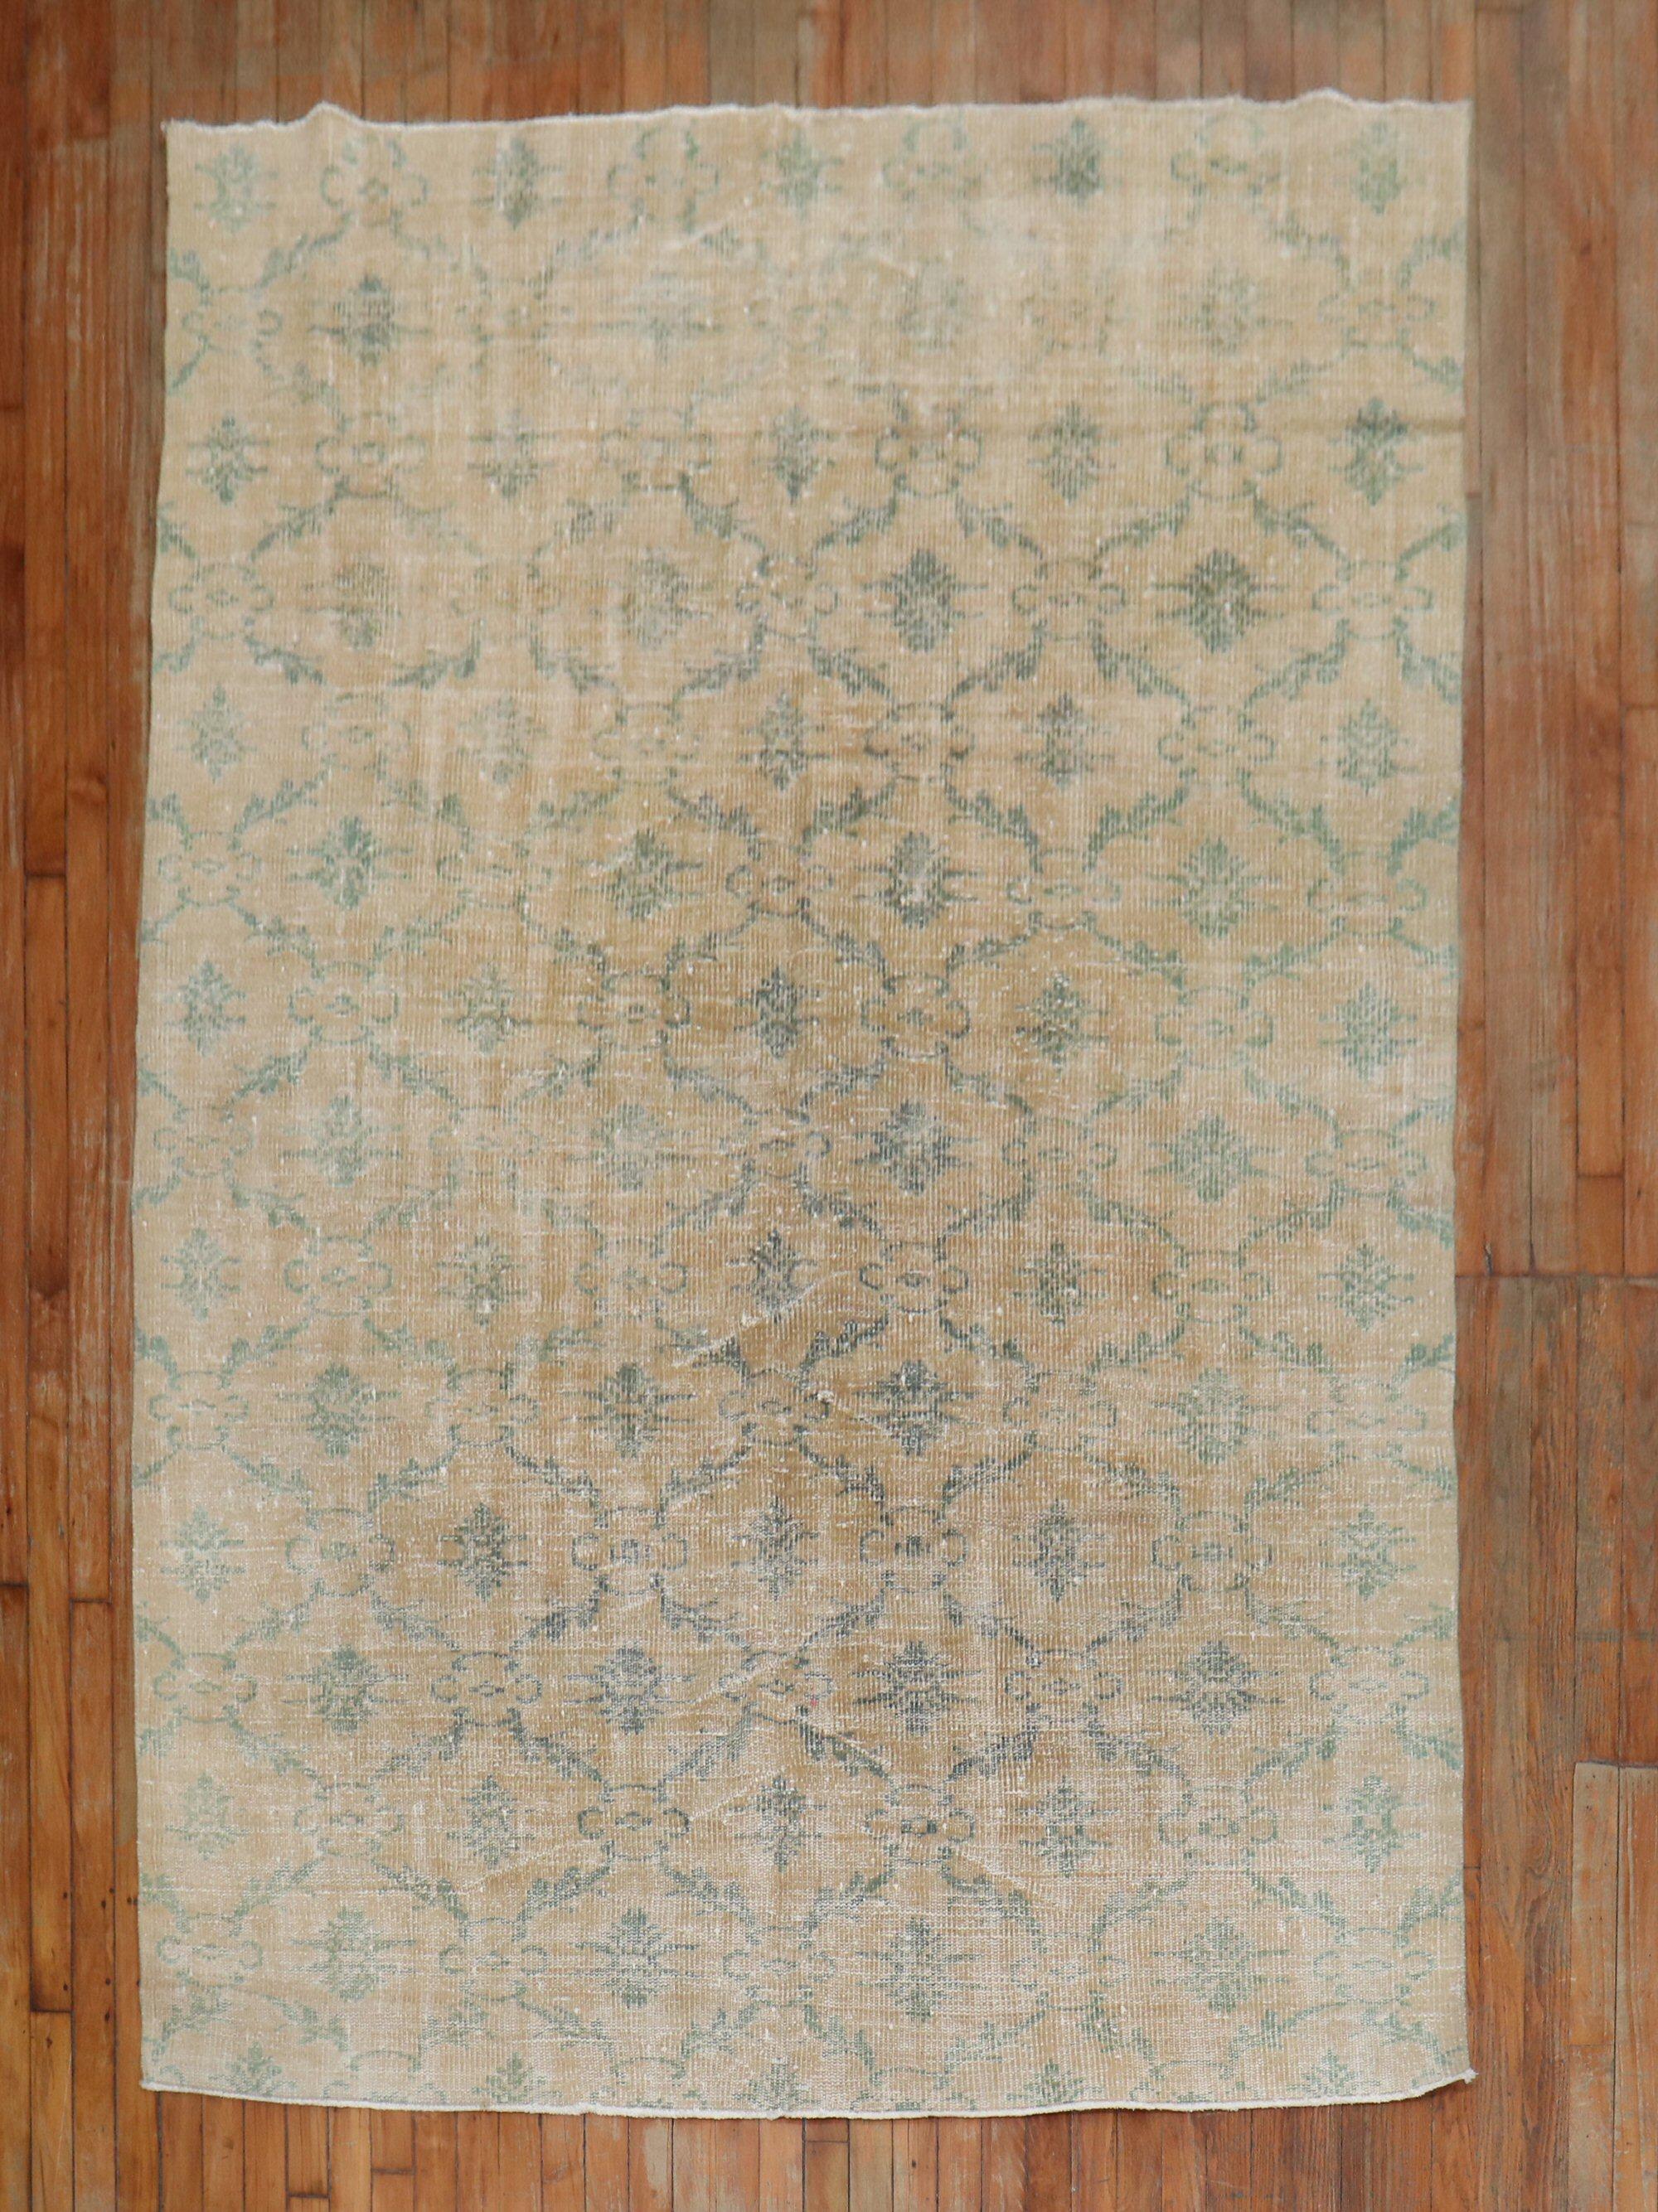 One of a kind Chic Distressed Mid 20th Century turkish rug with a repetitive borderless pattern in green on a bone colored field

Measures: 5'8'' x 8'11''